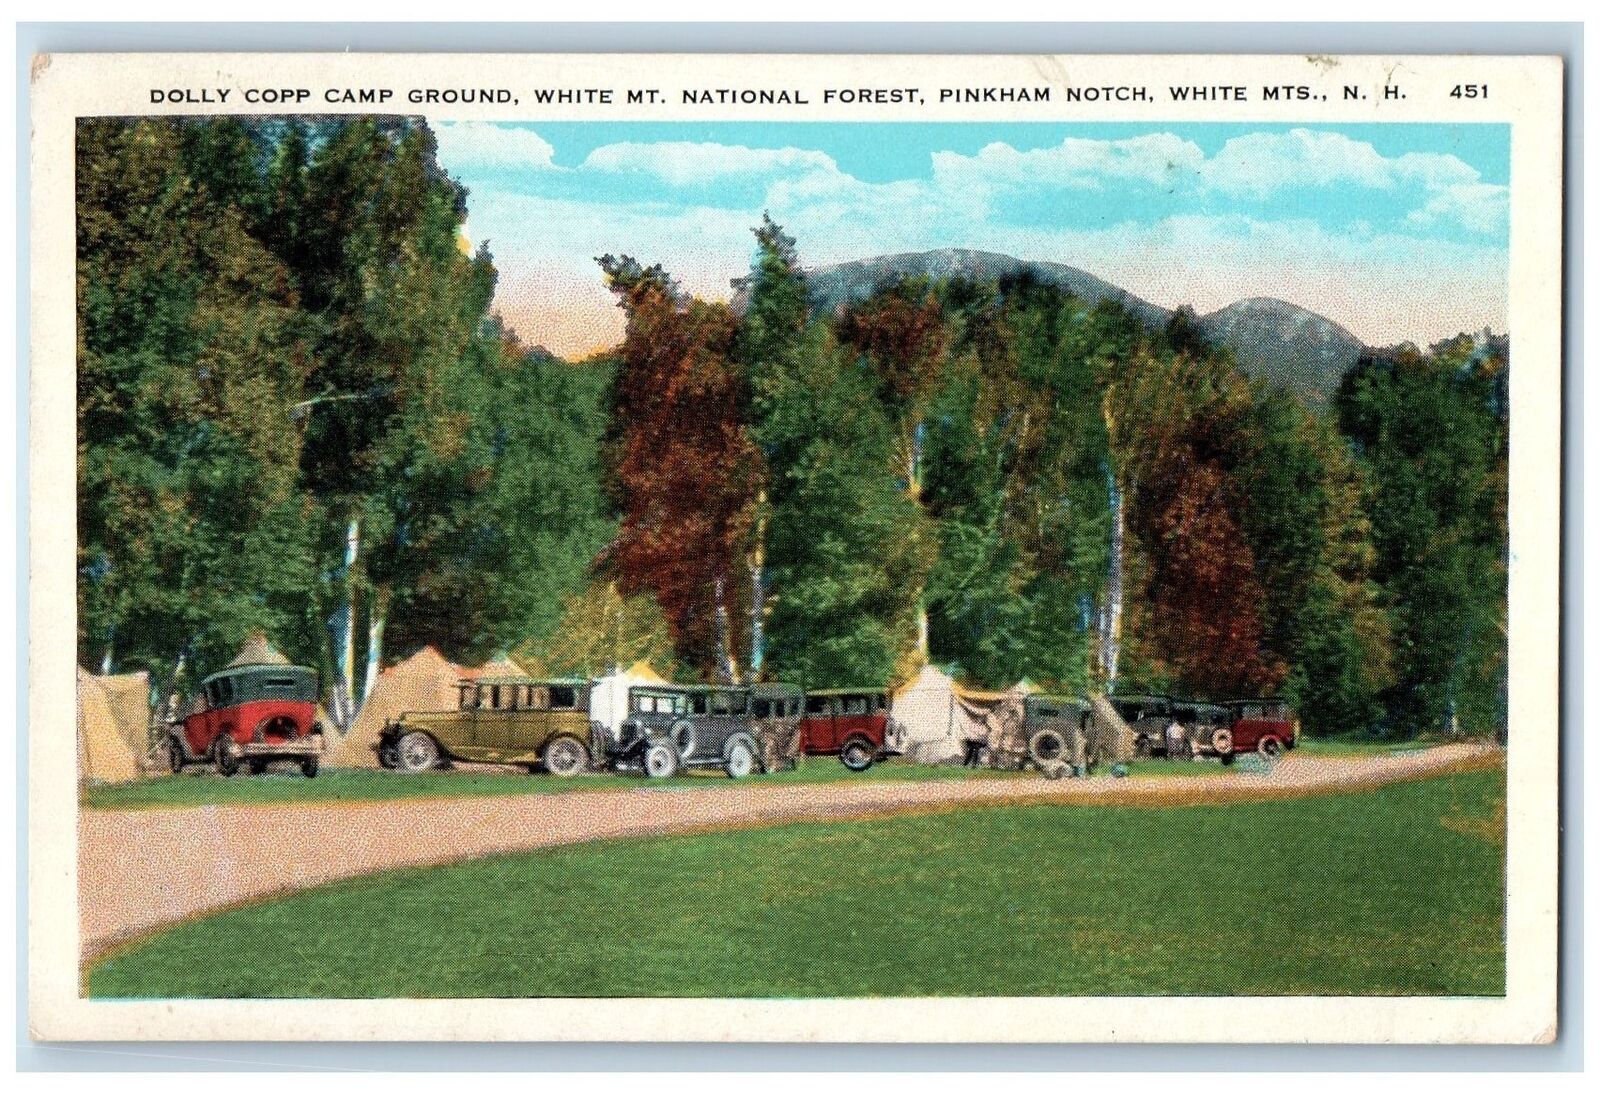 c1940s Dolly Copp Camp Ground White Mt National Forest Pinkham Notch NH Postcard